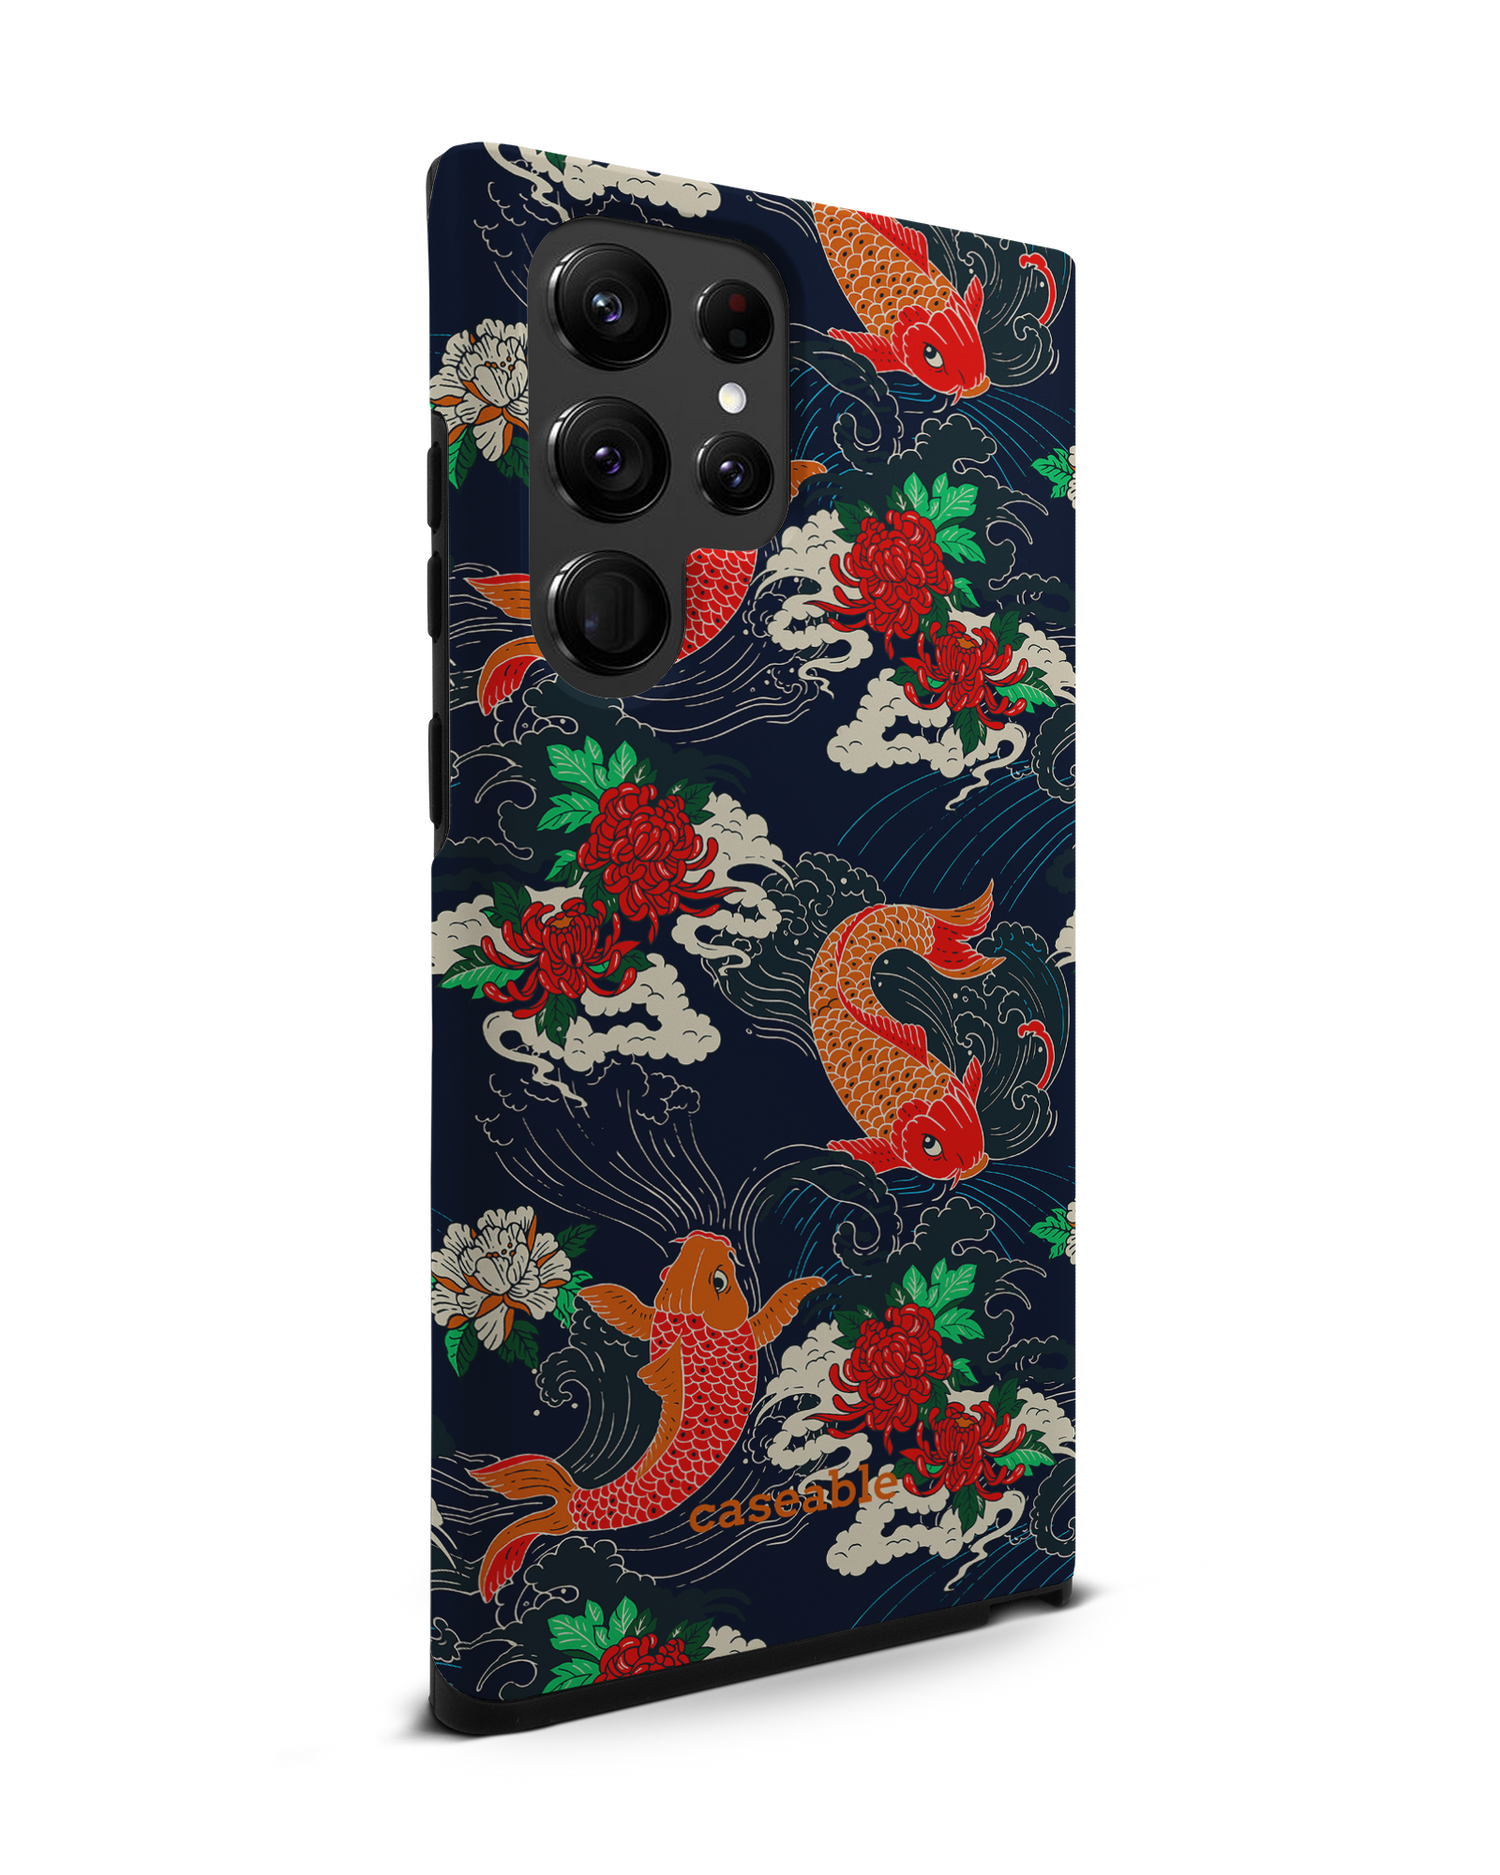 Repeating Koi Premium Phone Case Samsung Galaxy S22 Ultra 5G: View from the left side